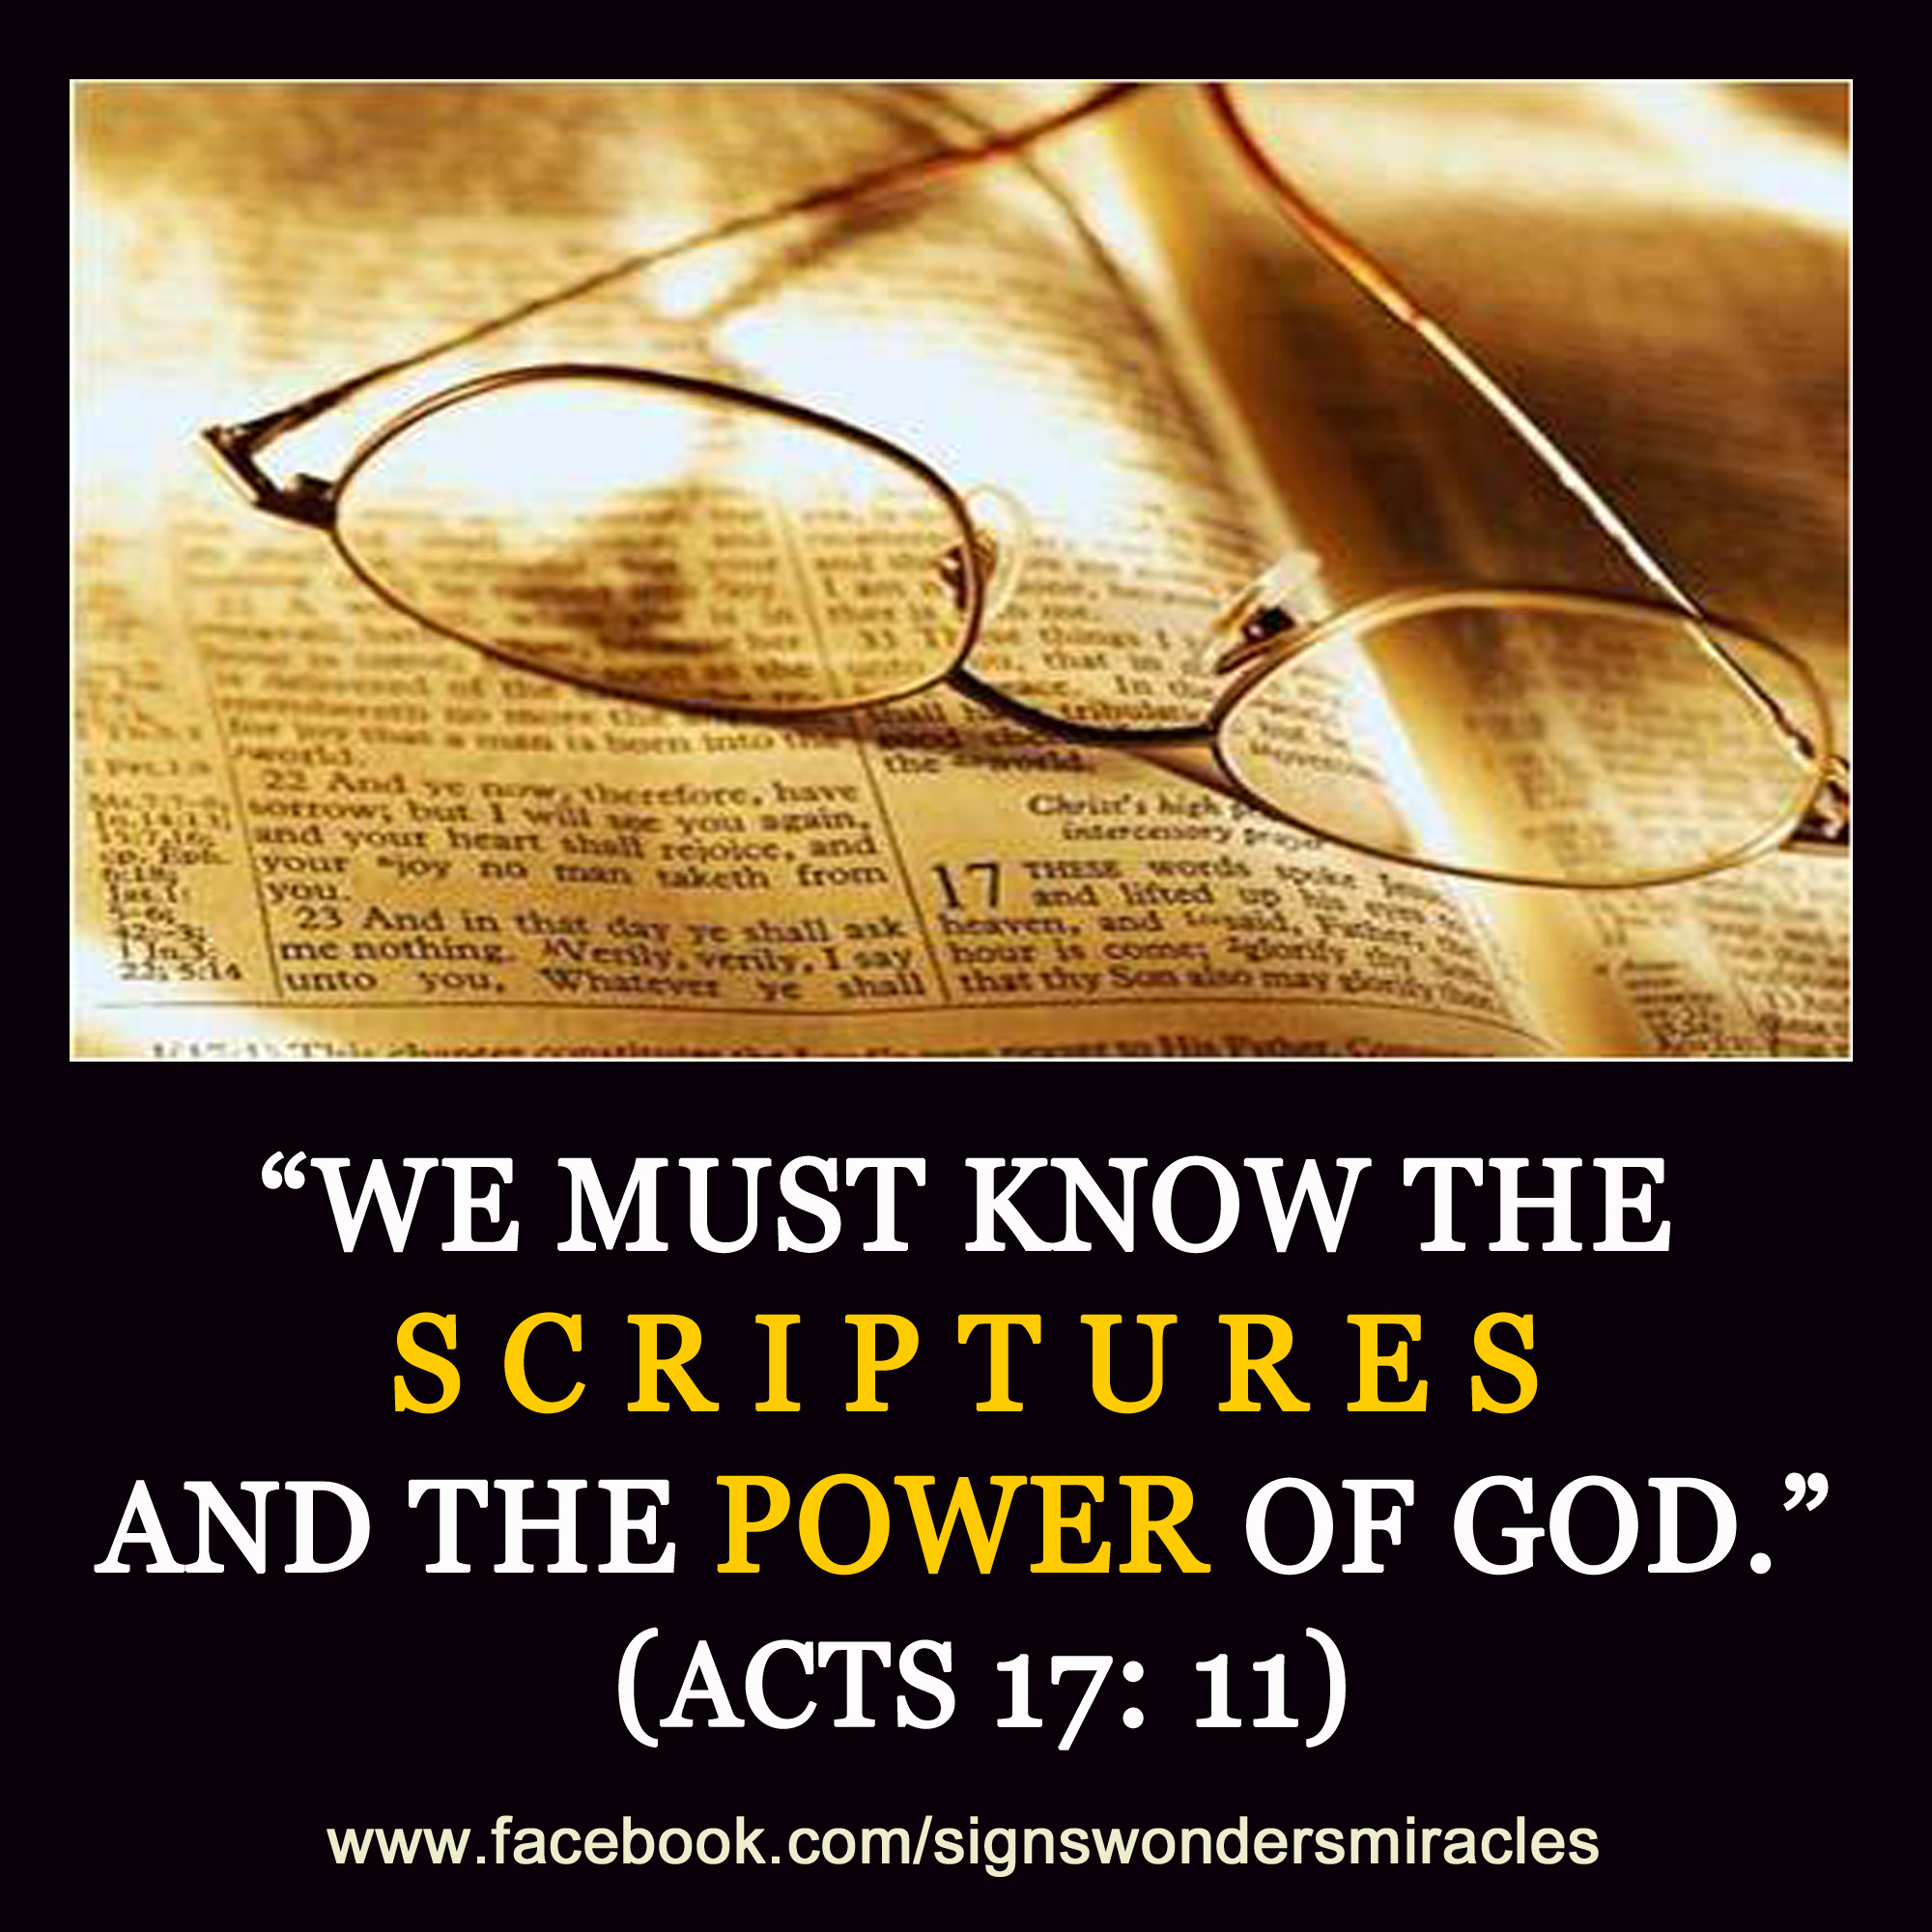 Know Scriptures and Power of God